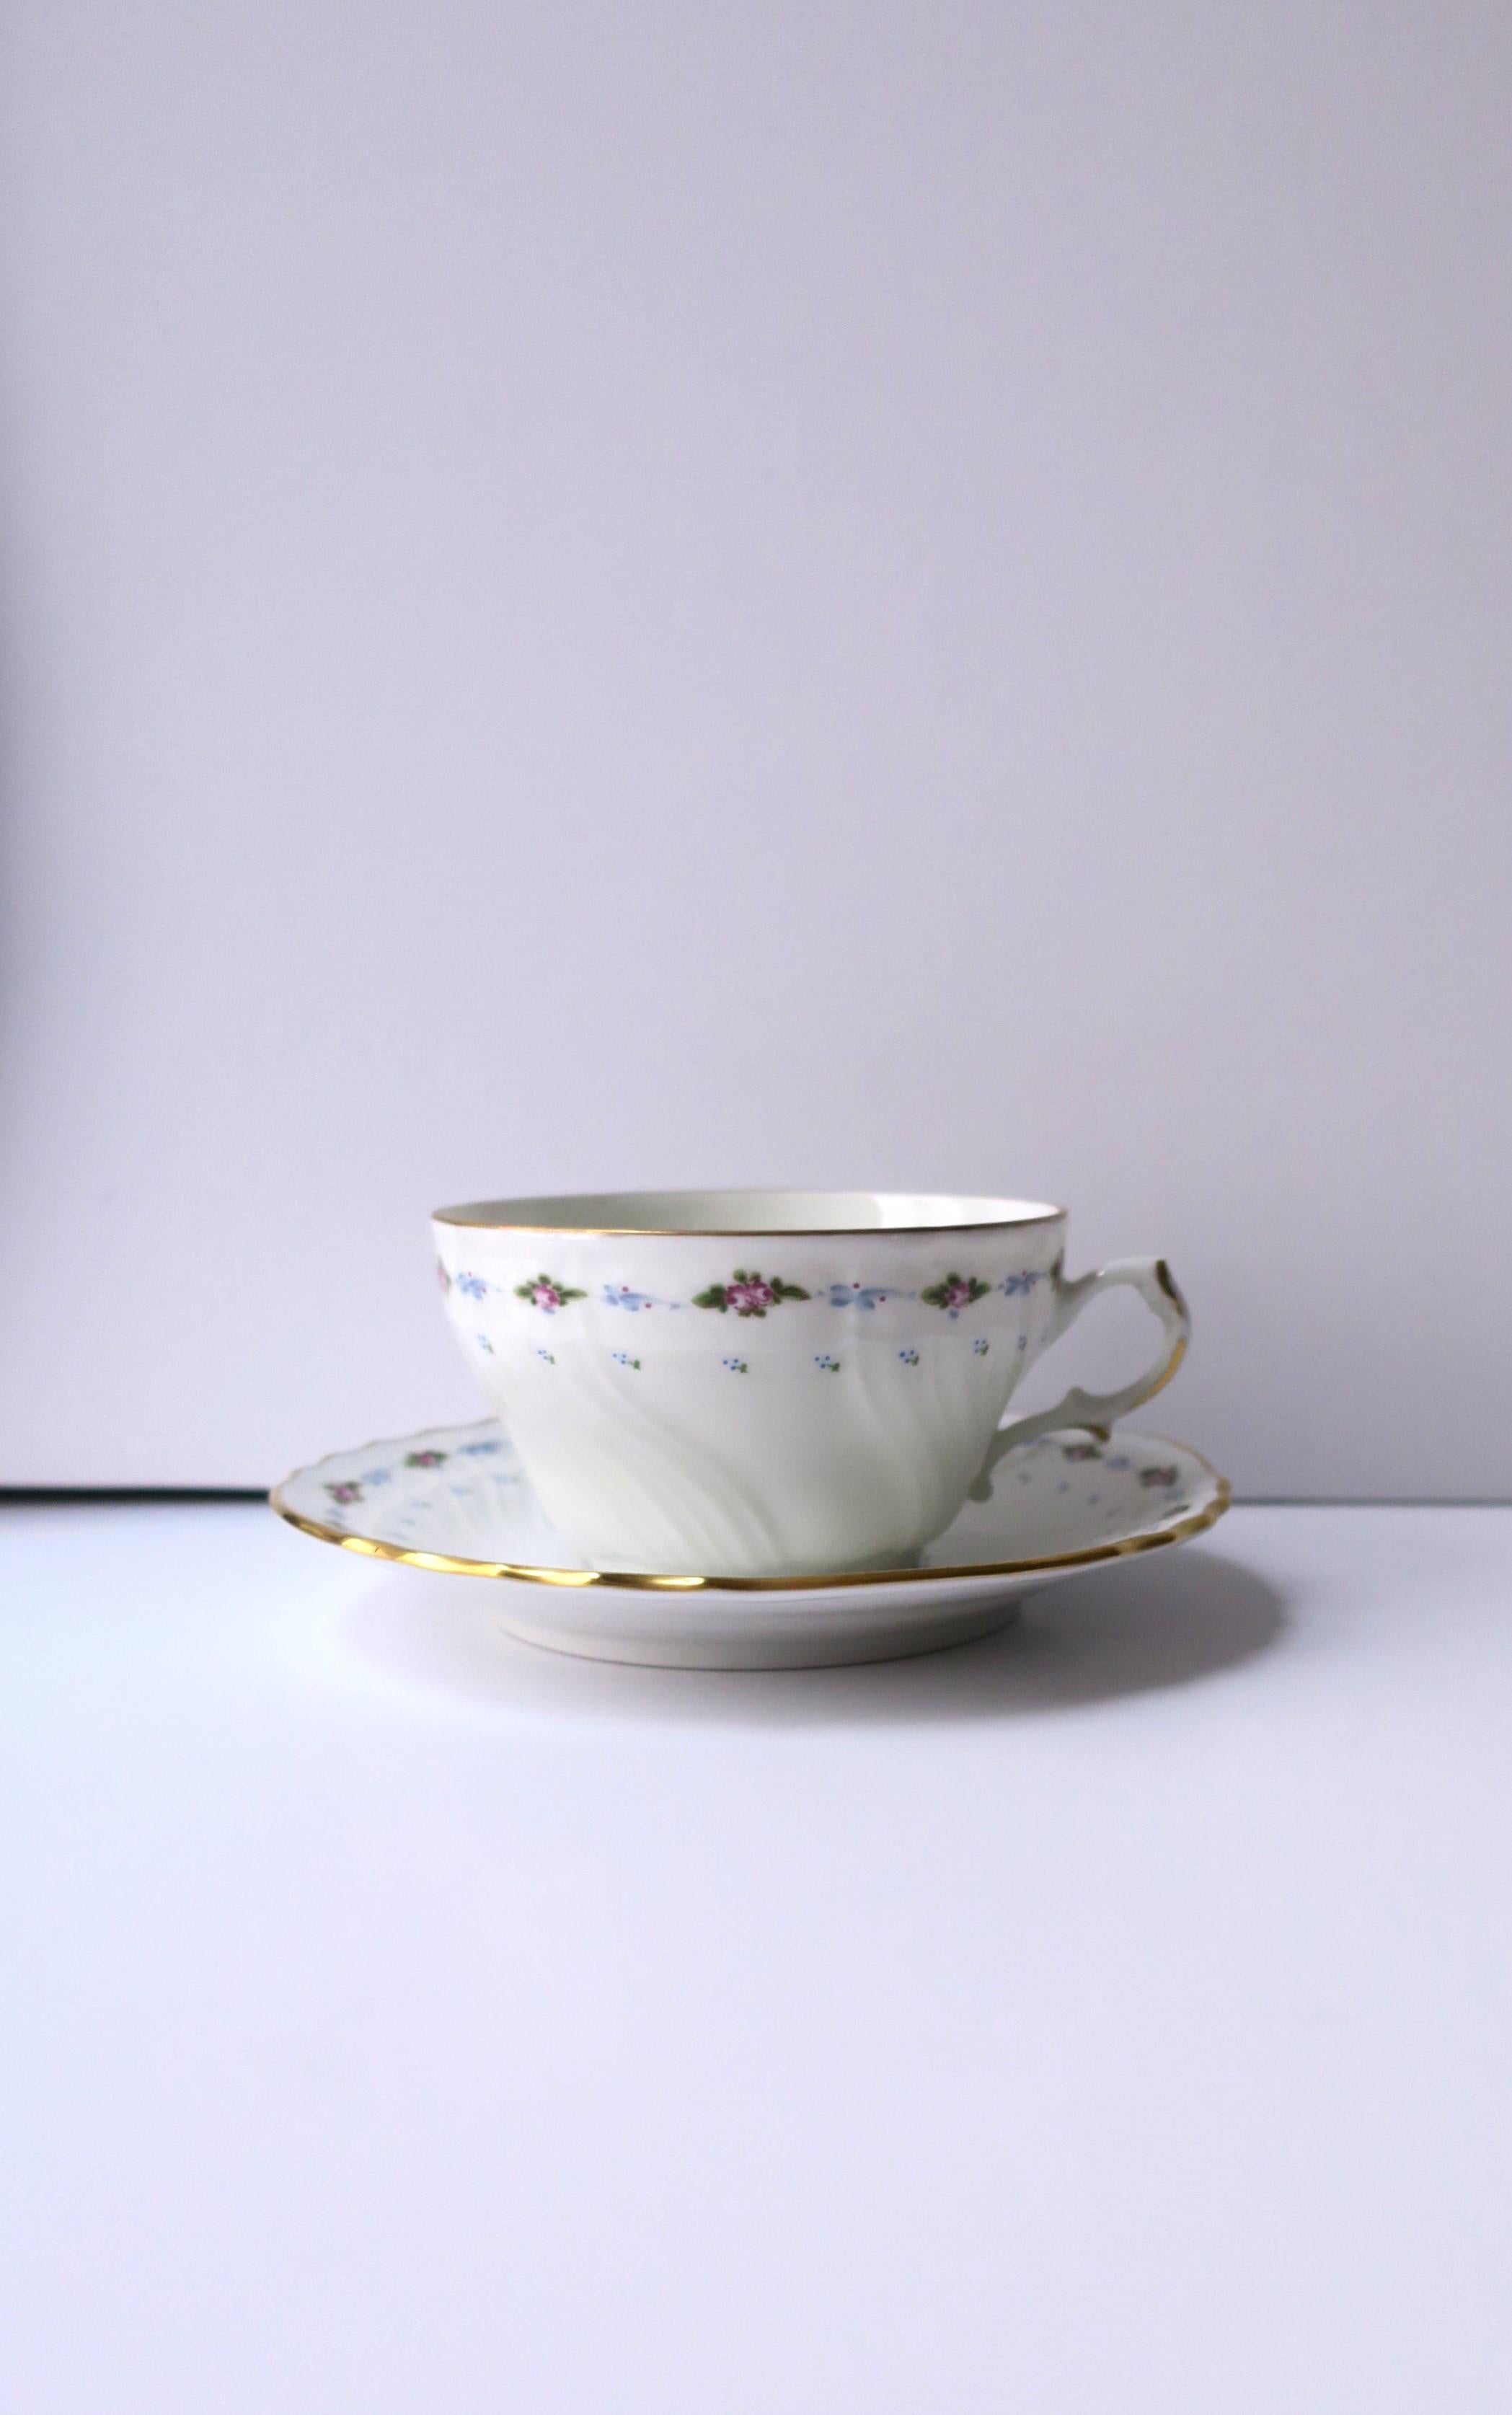 An Italian white porcelain coffee or tea cup and saucer, with floral design, by designer Richard Ginori, 1991, Italy. Both cup and saucer have a blue, green, and purple design of flowers and leaves around, finished with gold detail. A beautiful way